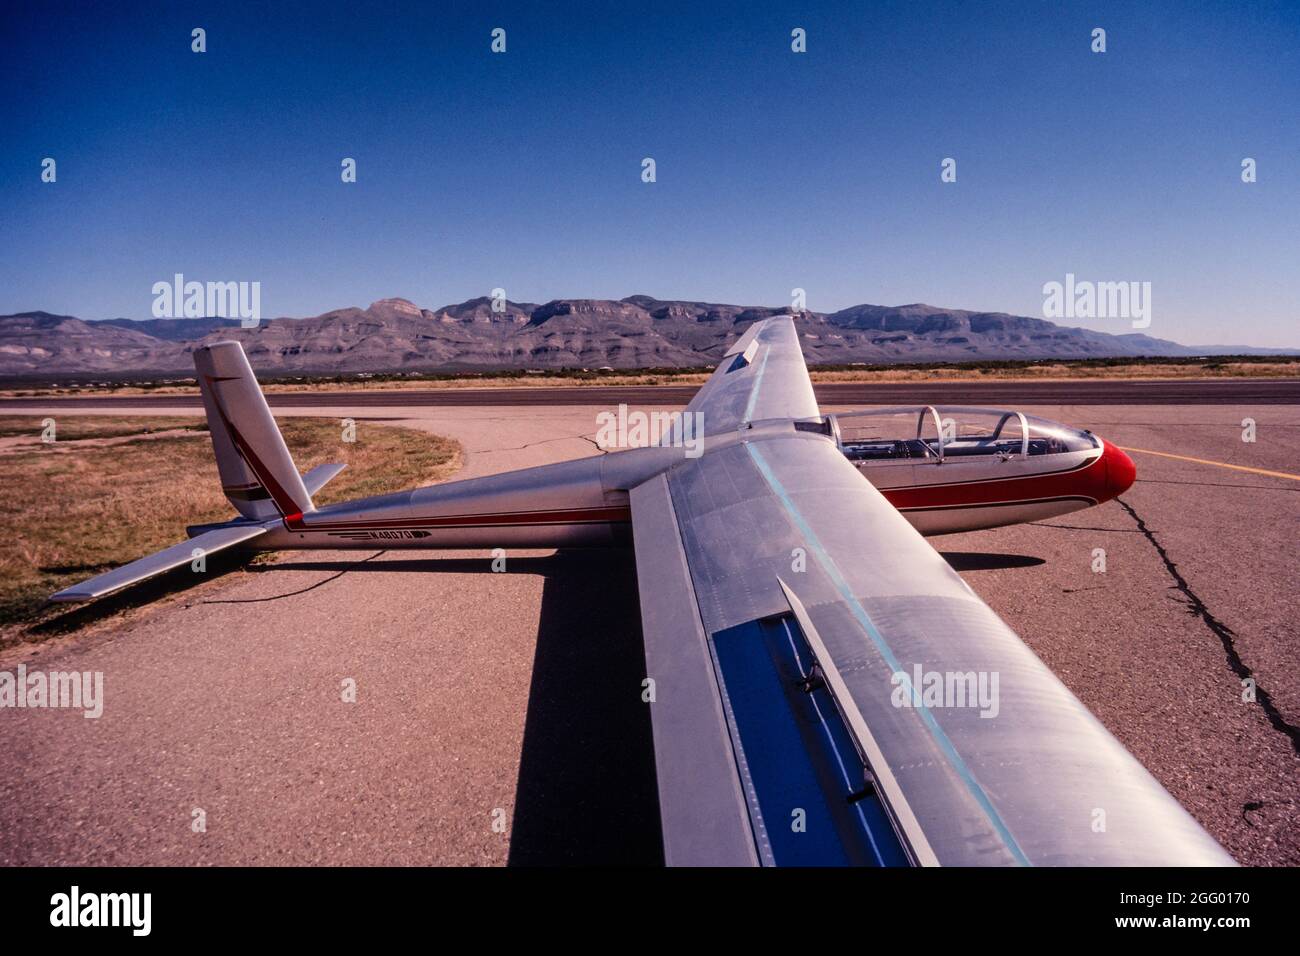 A Let Blanik L-13 two-seat training glider on the apron at an airport in Alomogordo, New Mexico. Stock Photo